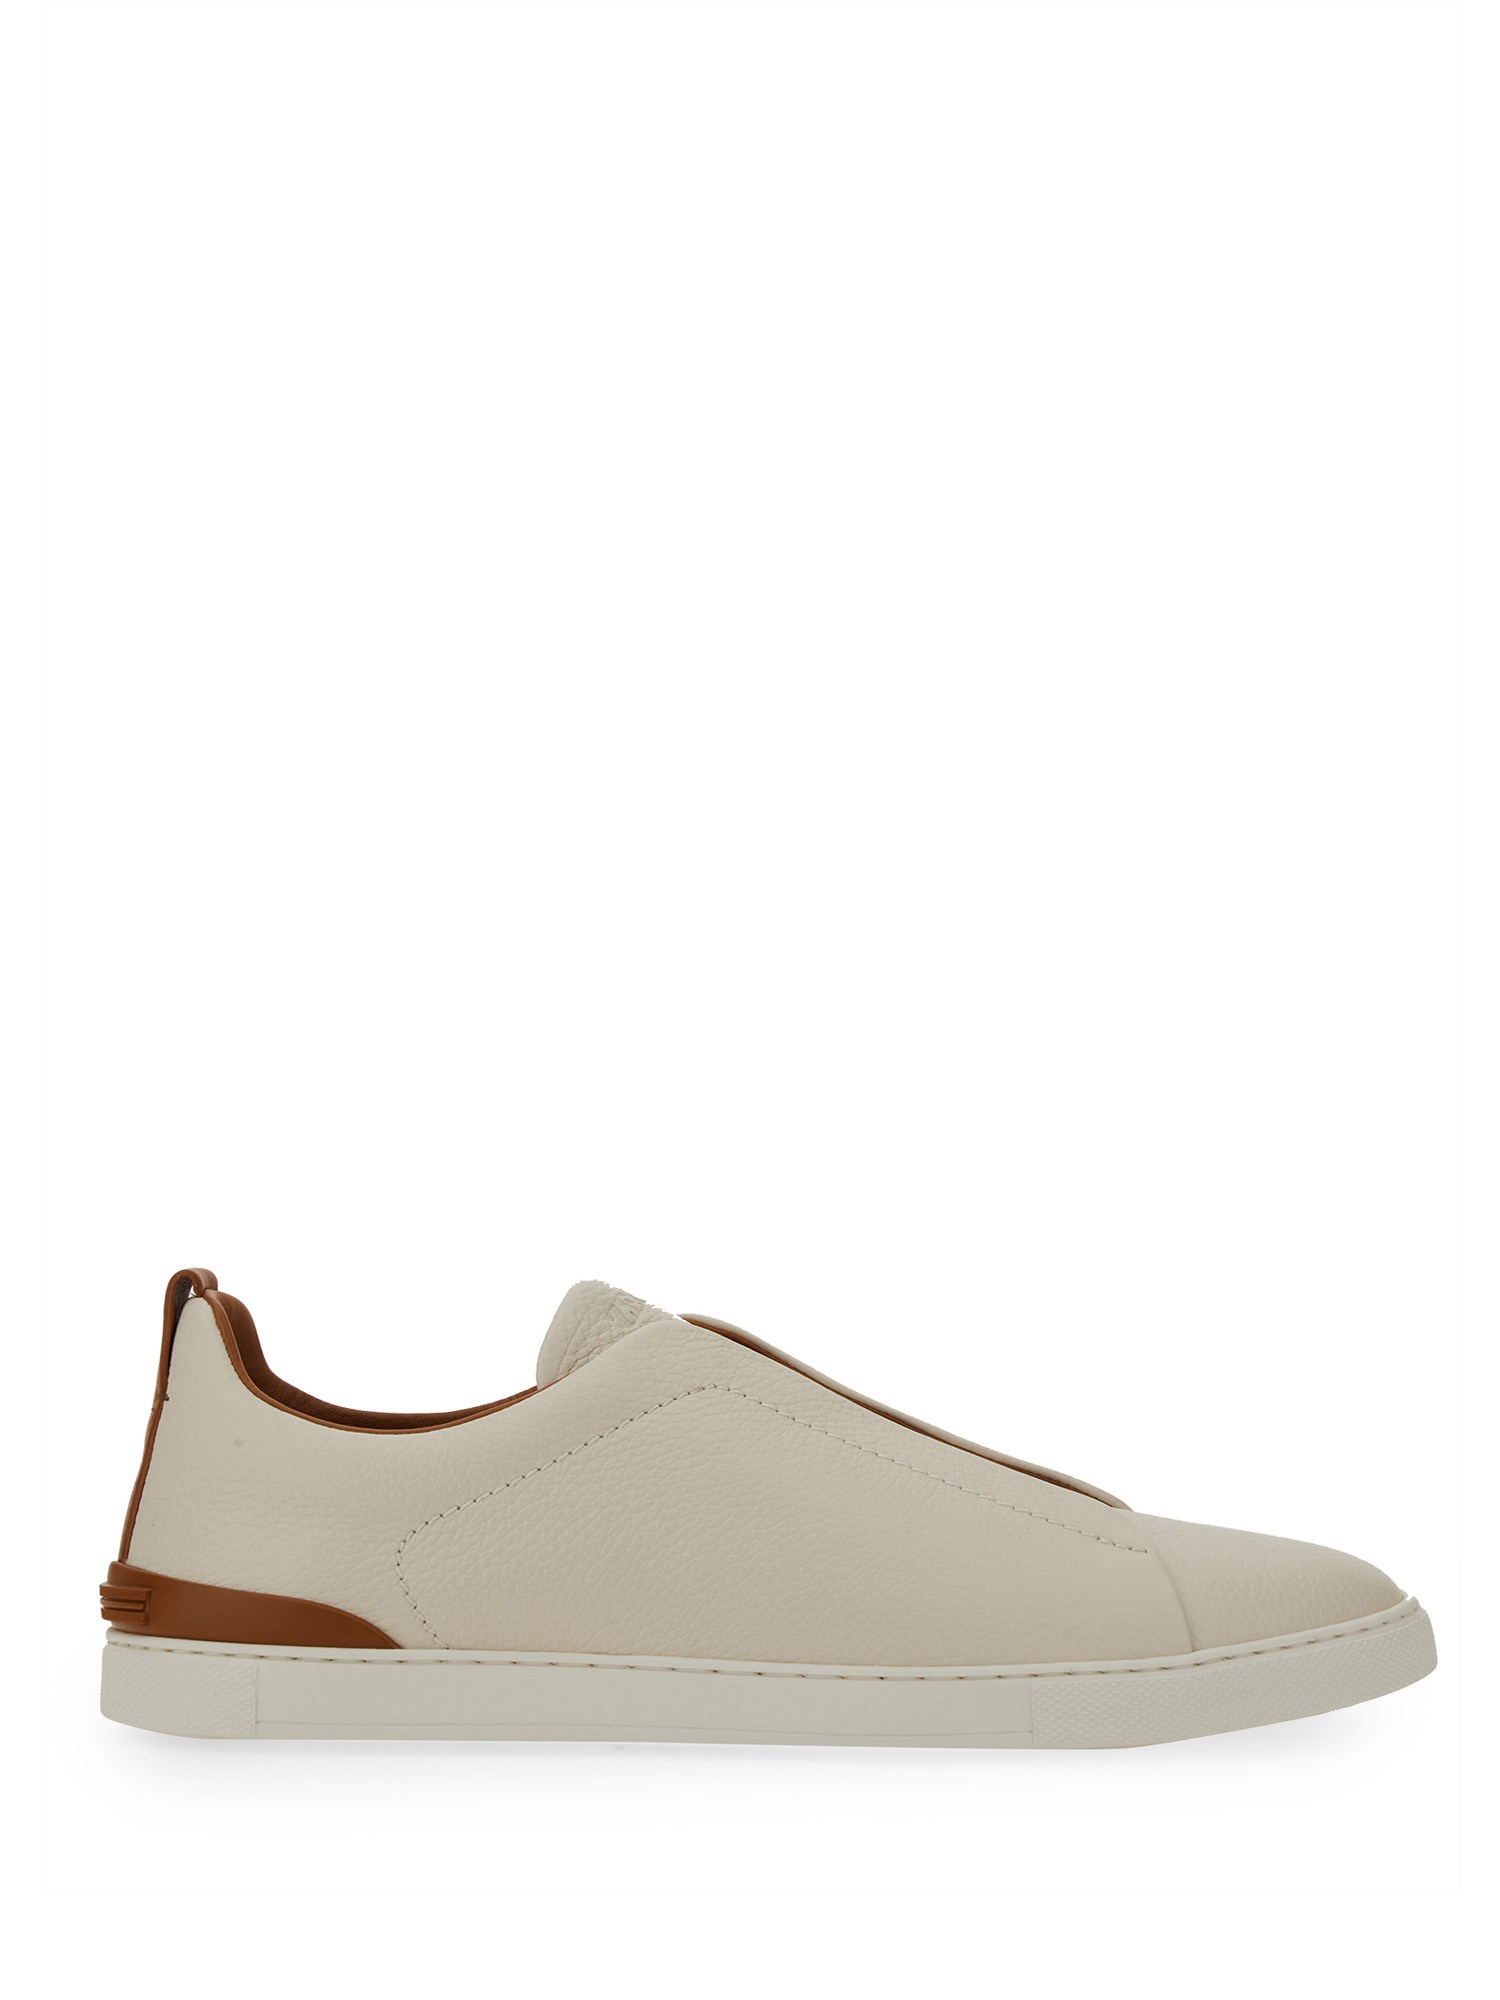 zegna low top sneaker with triple stitch